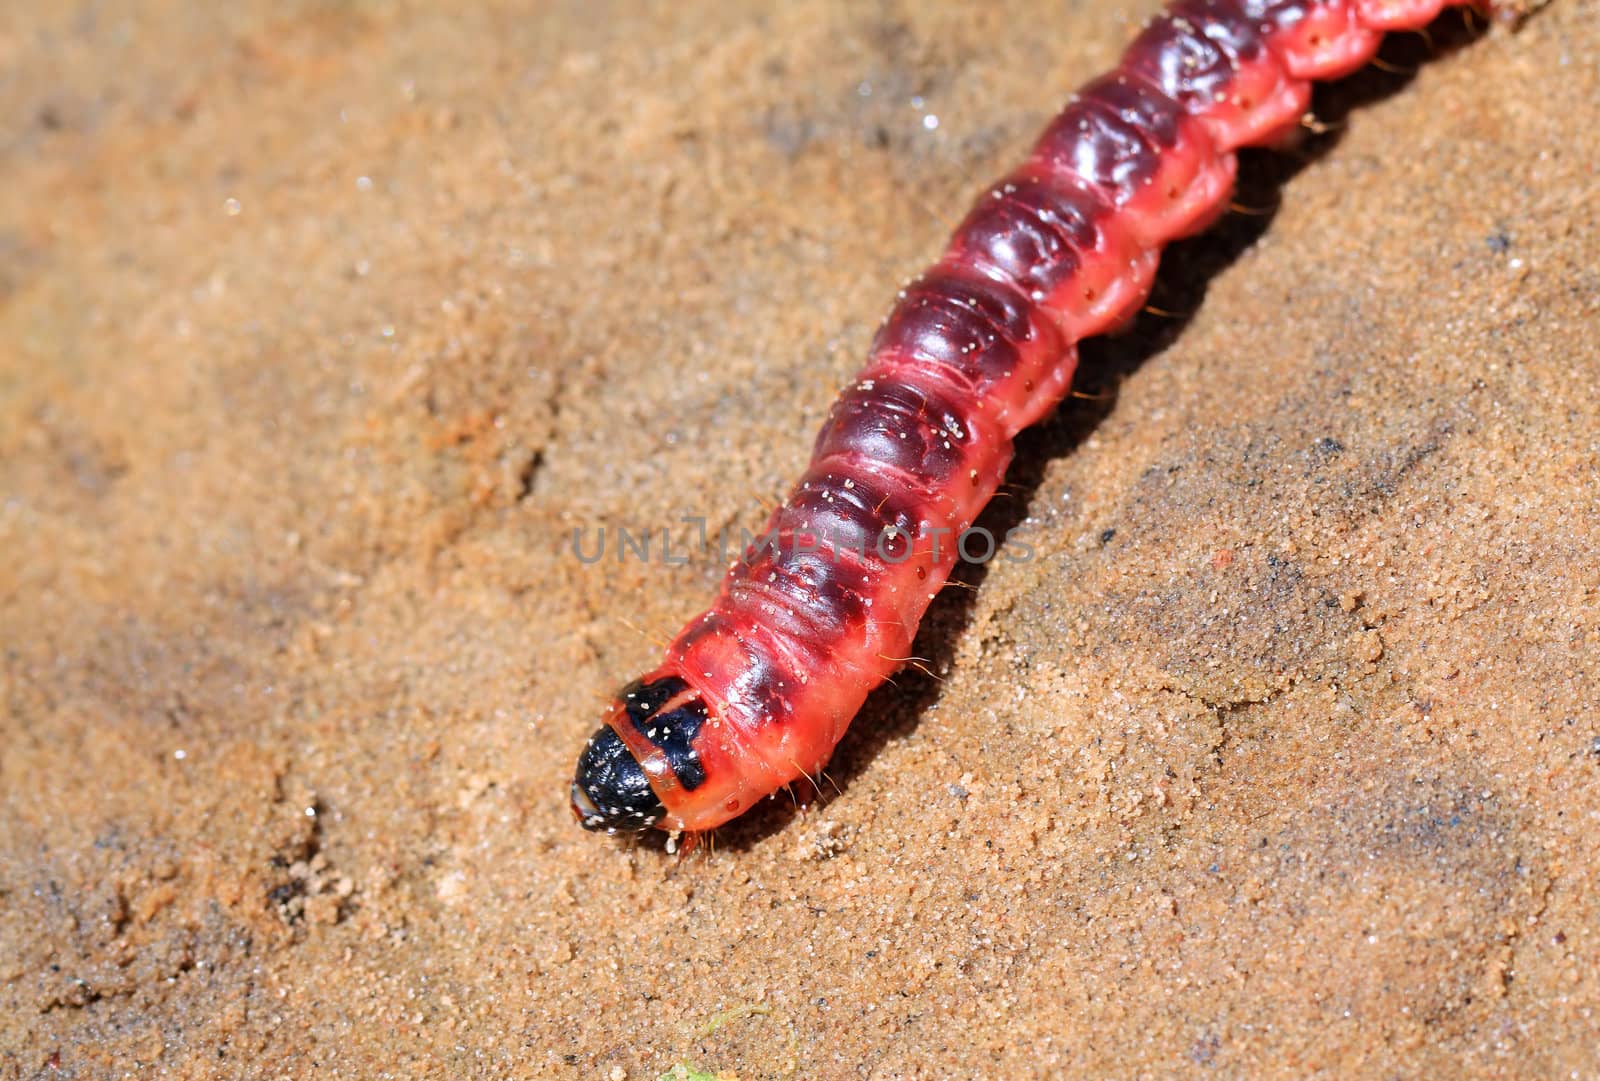 red caterpillar on dry sand by basel101658